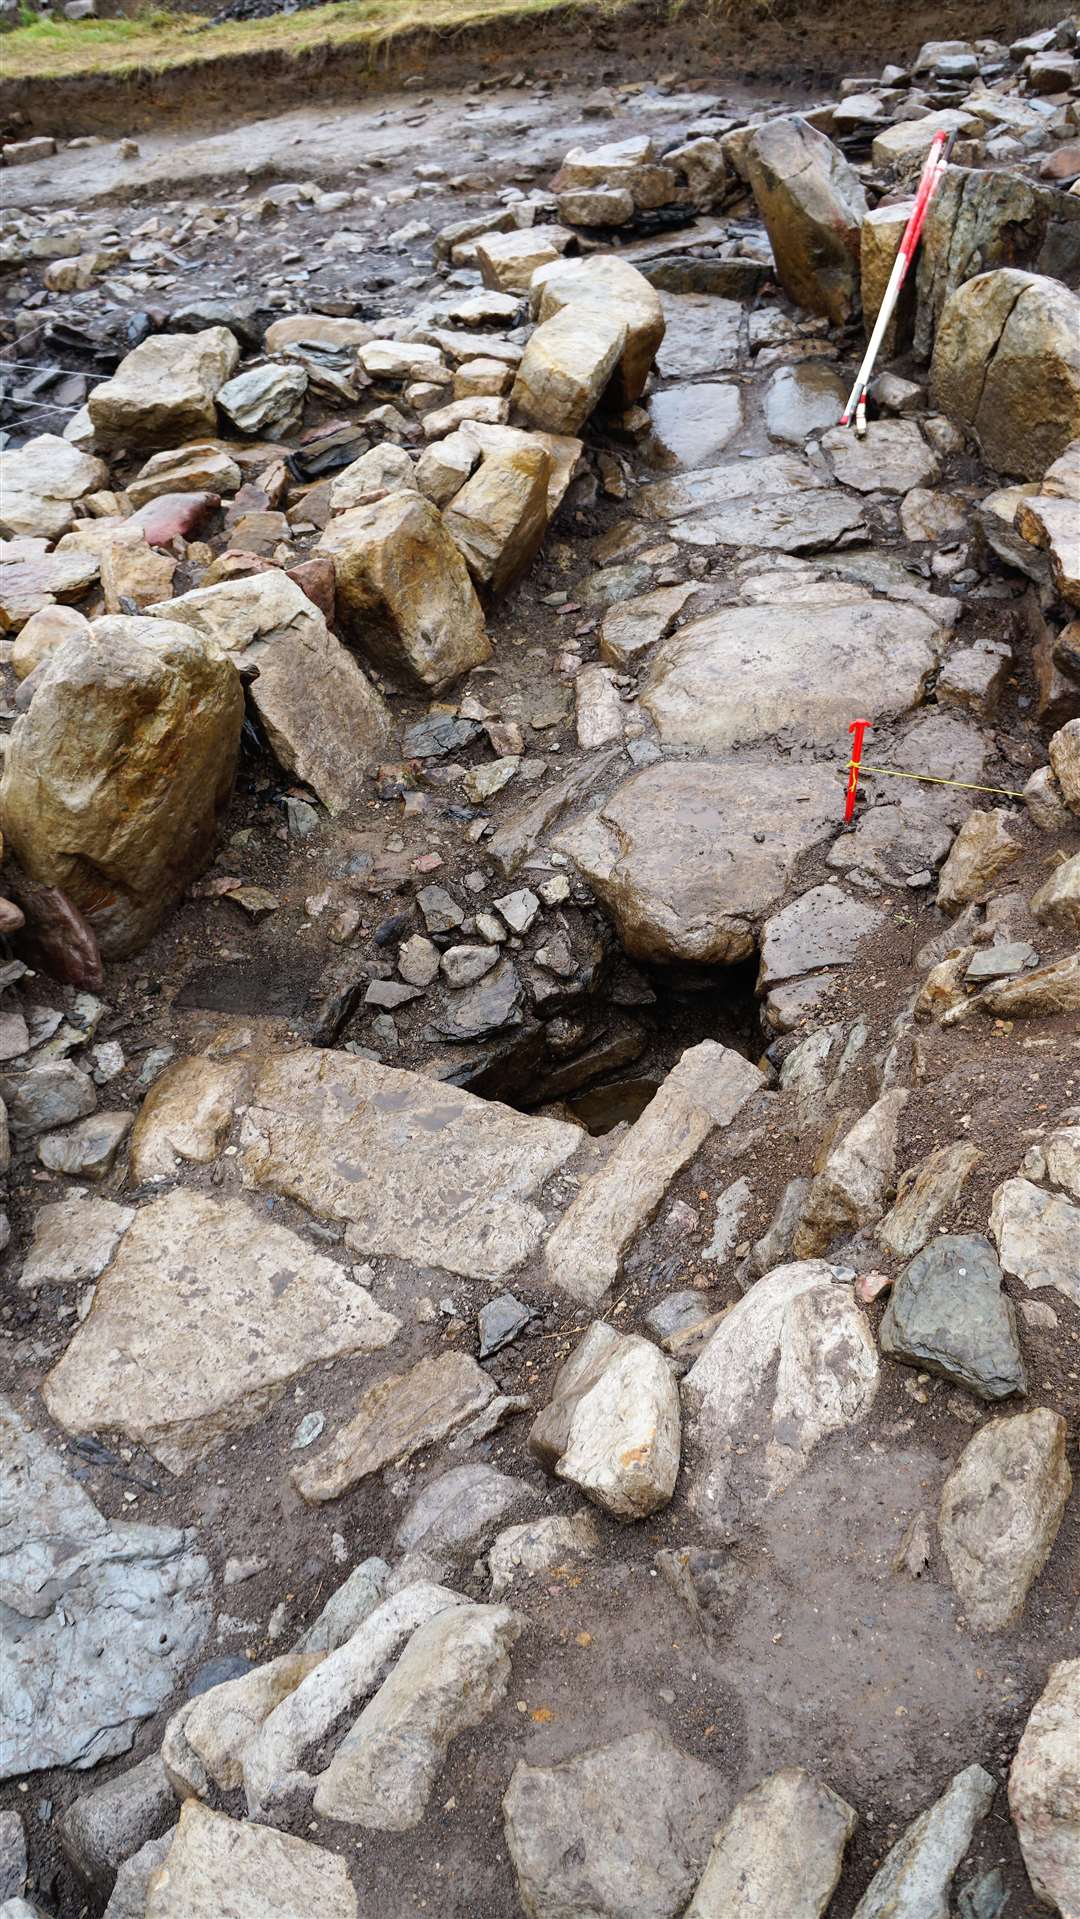 This part of the dig at Swartigill appears to be a souterrain and may have been used to store food. It was recently discovered that there are channels under it that may have allowed water to flow through to help cool and preserve the larder. Picture: DGS